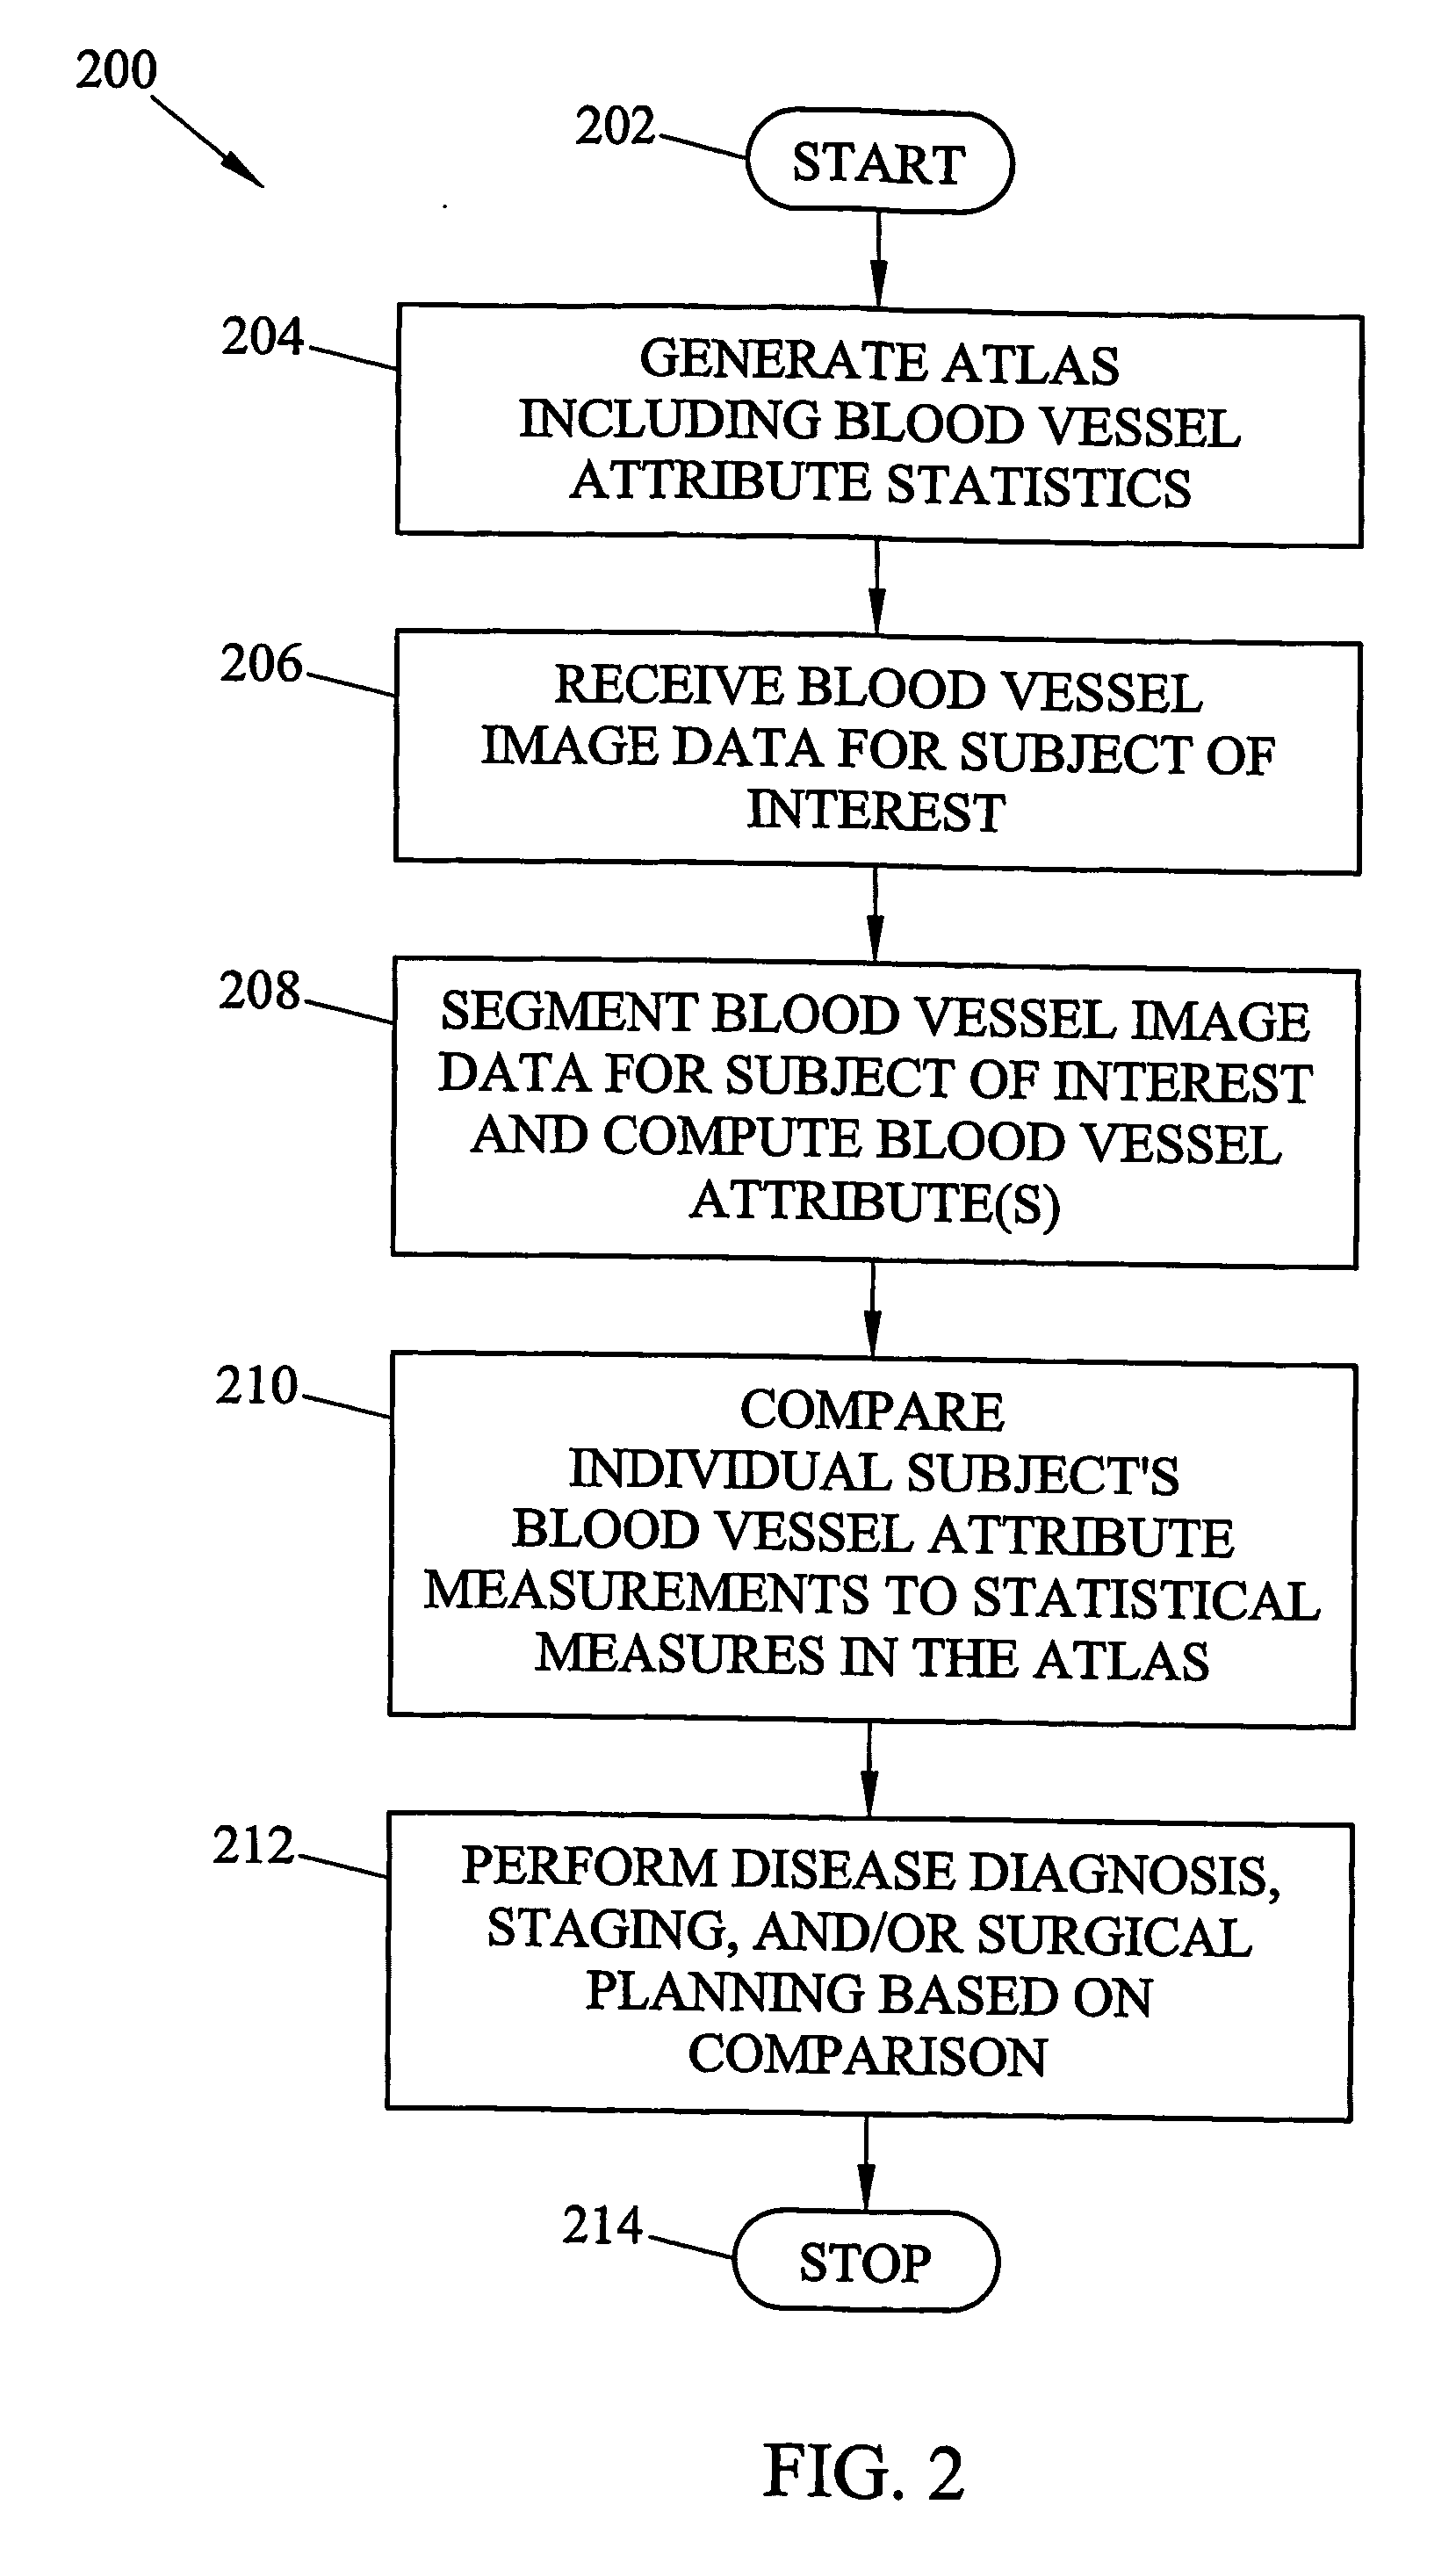 Systems, methods, and computer program products for analysis of vessel attributes for diagnosis, disease staging, and surfical planning